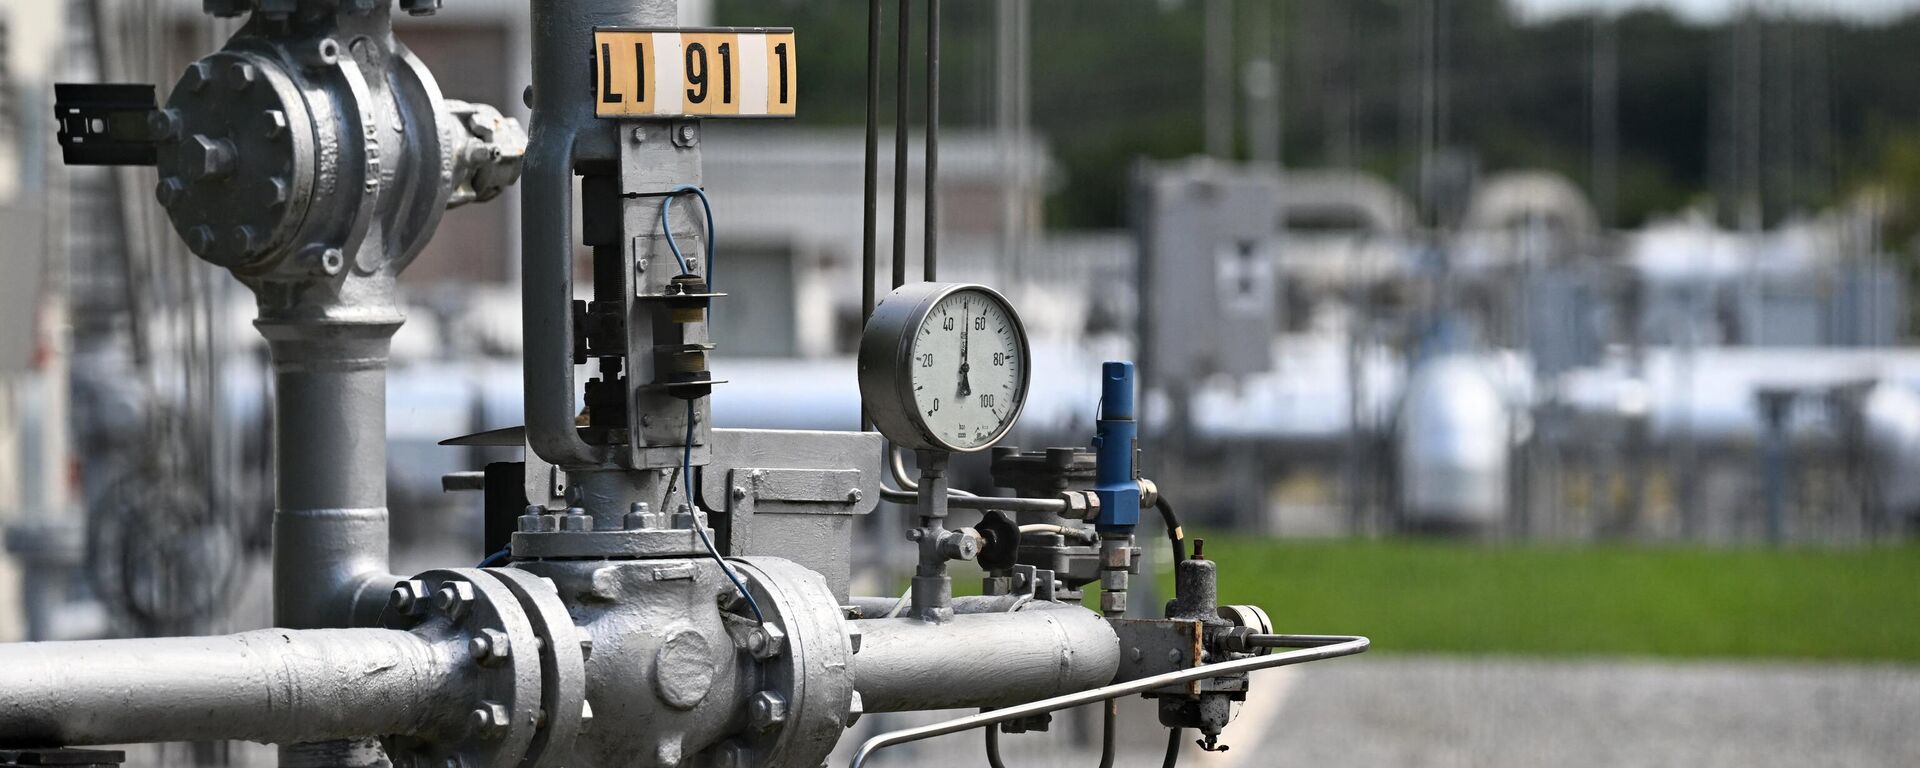 In this file photo taken on July 15, 2022 A pressure gauge for gas lines is pictured at Open Grid Europe (OGE), one of Europe's largest gas transmission system operators, in Werne, western Germany - Sputnik International, 1920, 02.12.2022